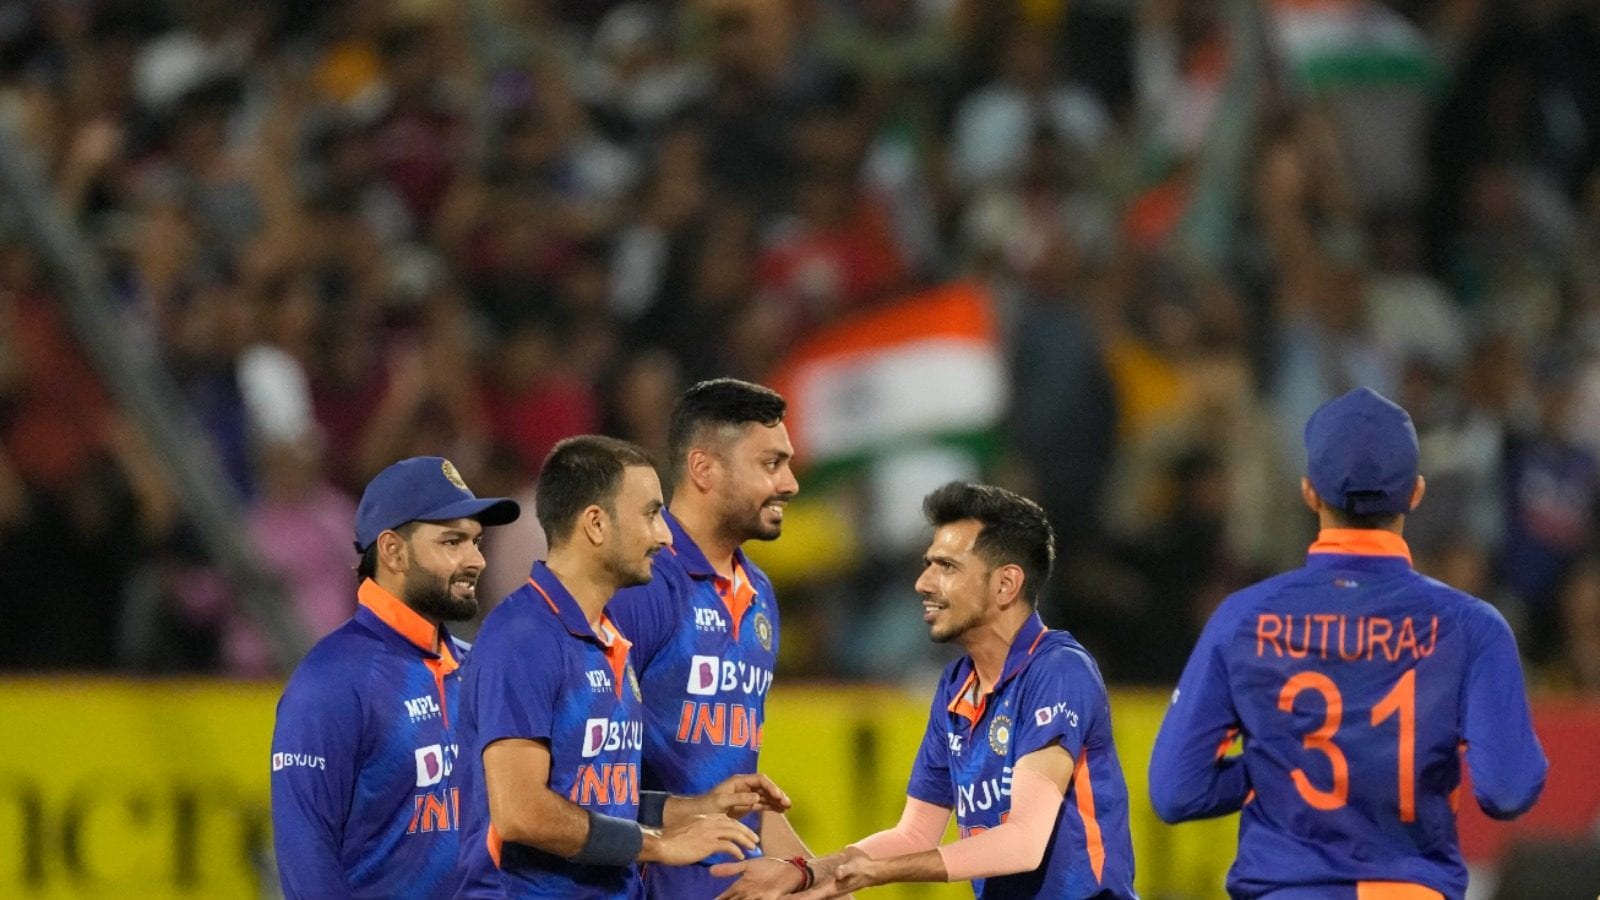 4th-t20i-dinesh-karthik-avesh-khan-guide-india-to-clinical-82-run-win-over-south-africa-series-level-at-2-2